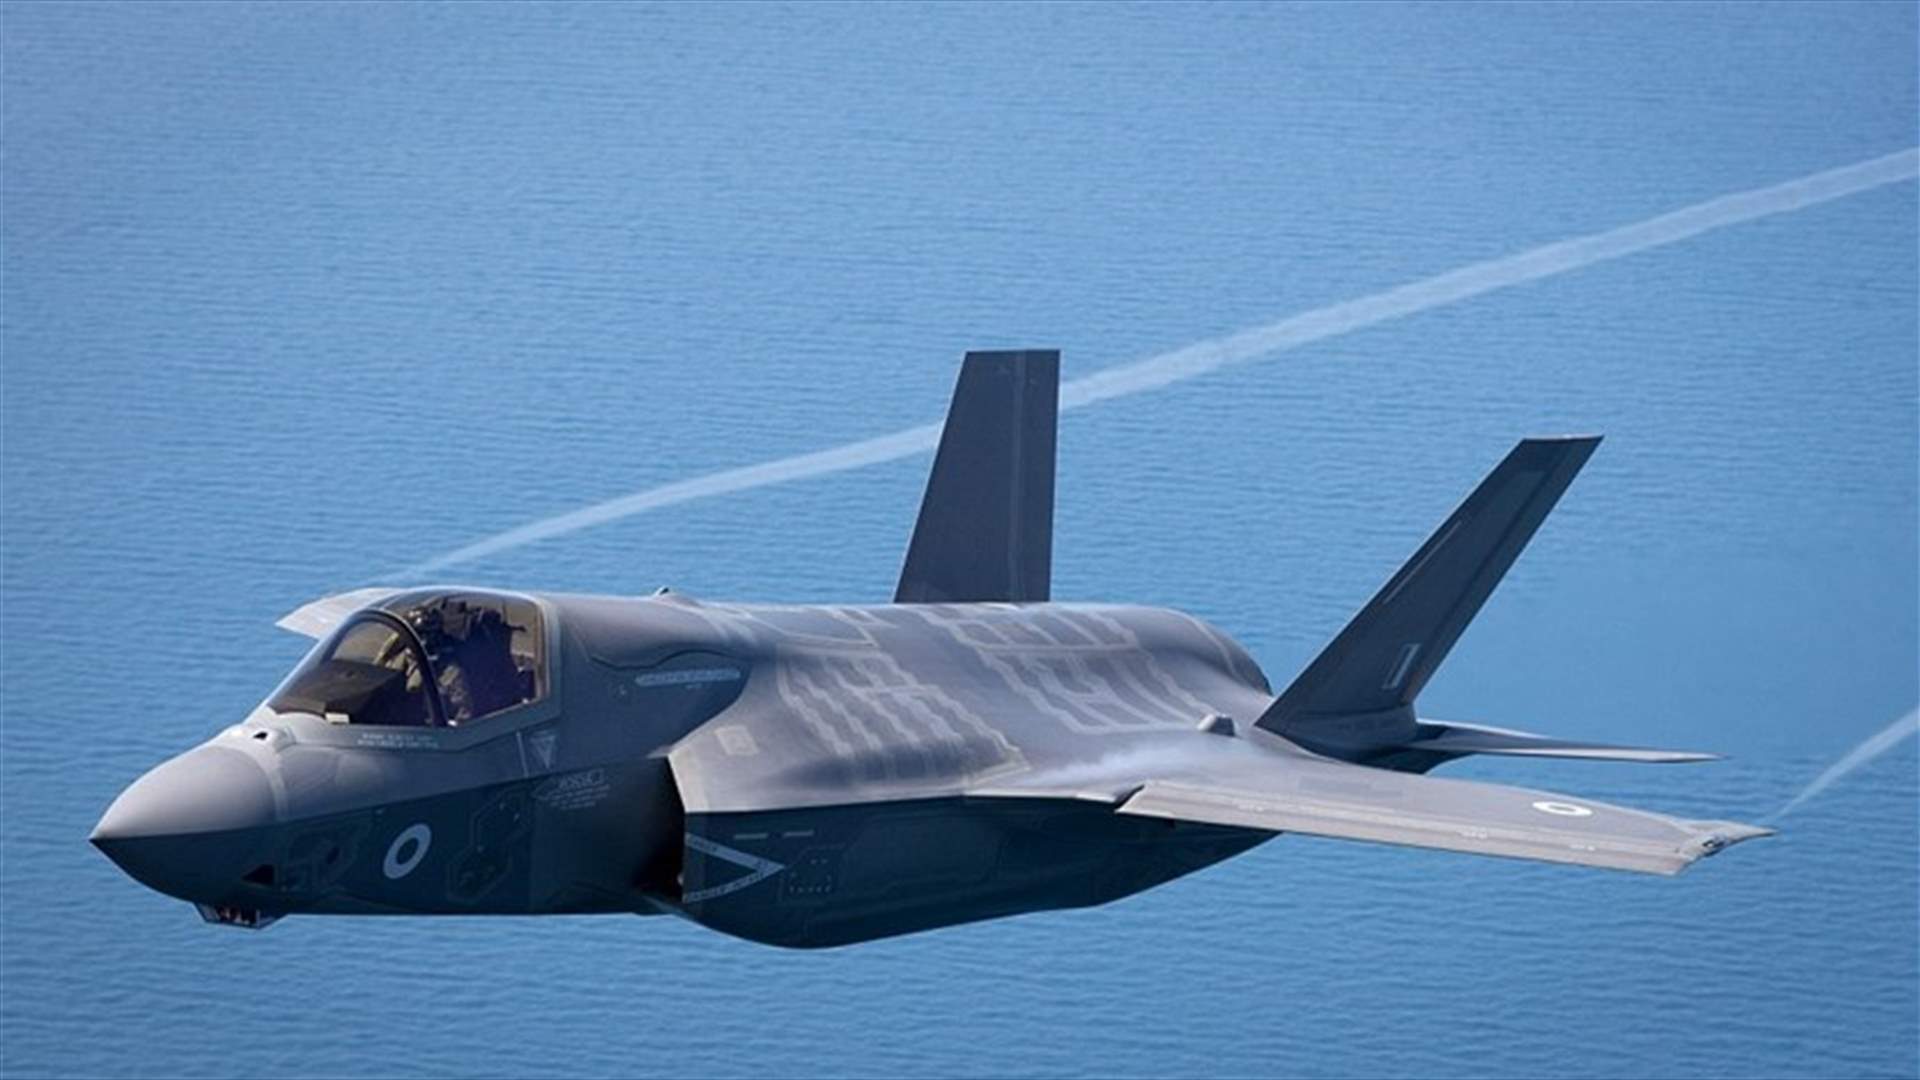 [VIDEO] Watch The New F-35 Stealth Fighter Jet Which Can Take Off Vertically